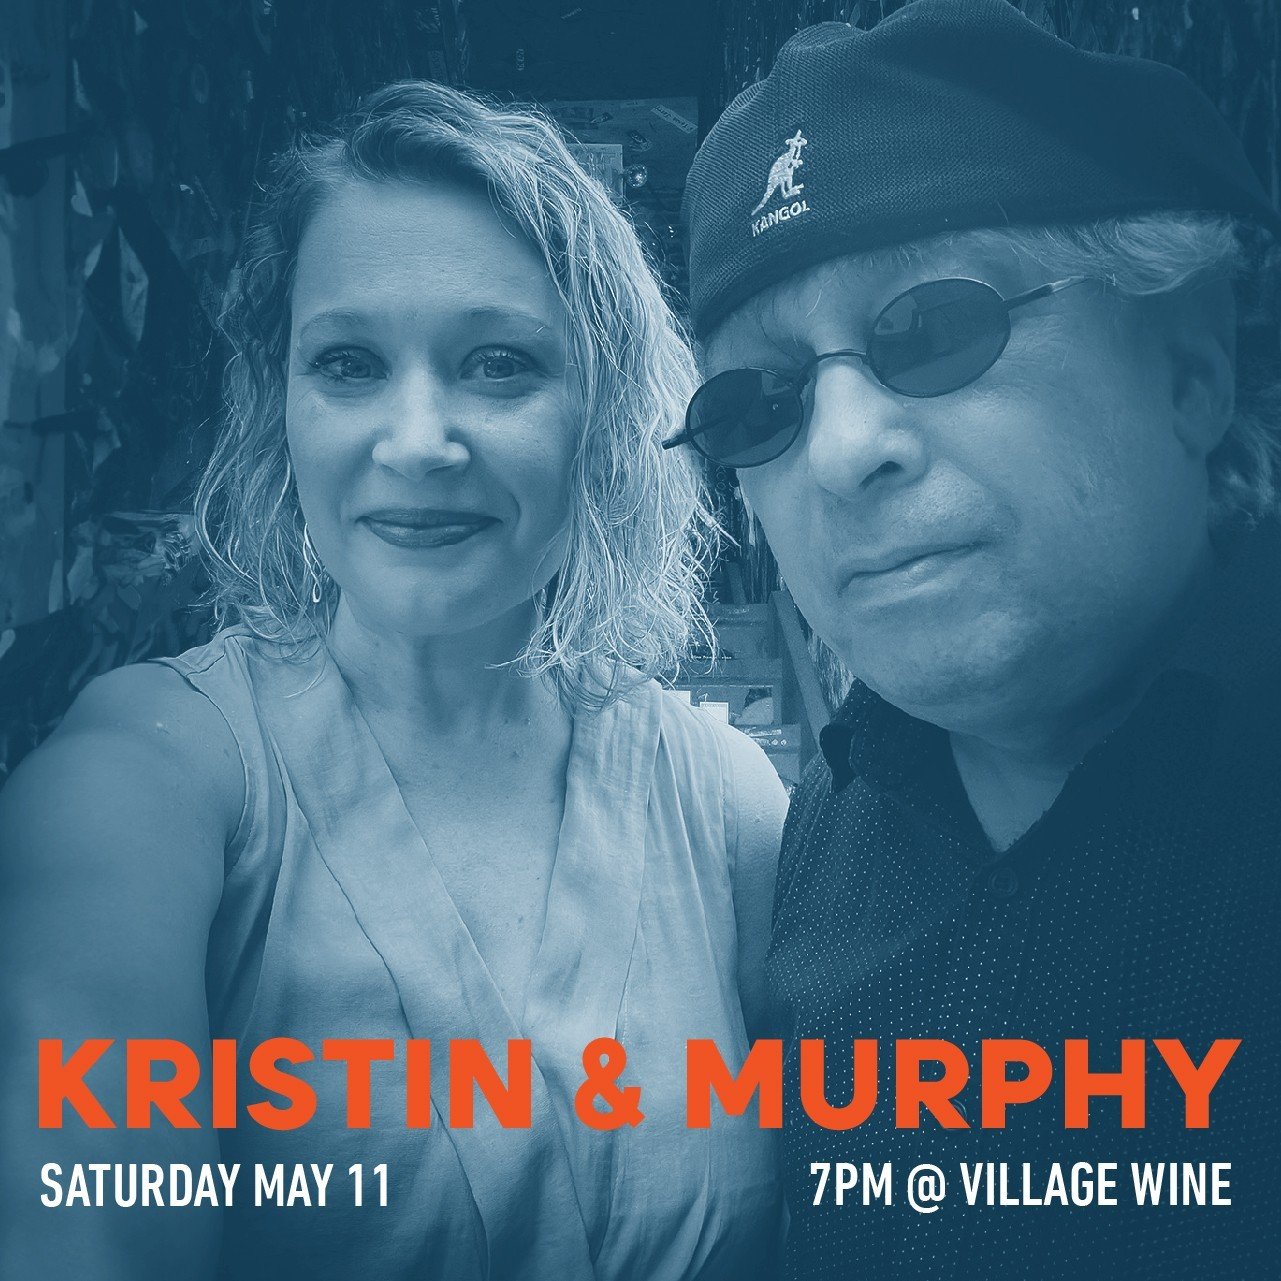 Kristin &amp; Murphy this weekend! Join us for a fun night with 2 members of the Flynts!